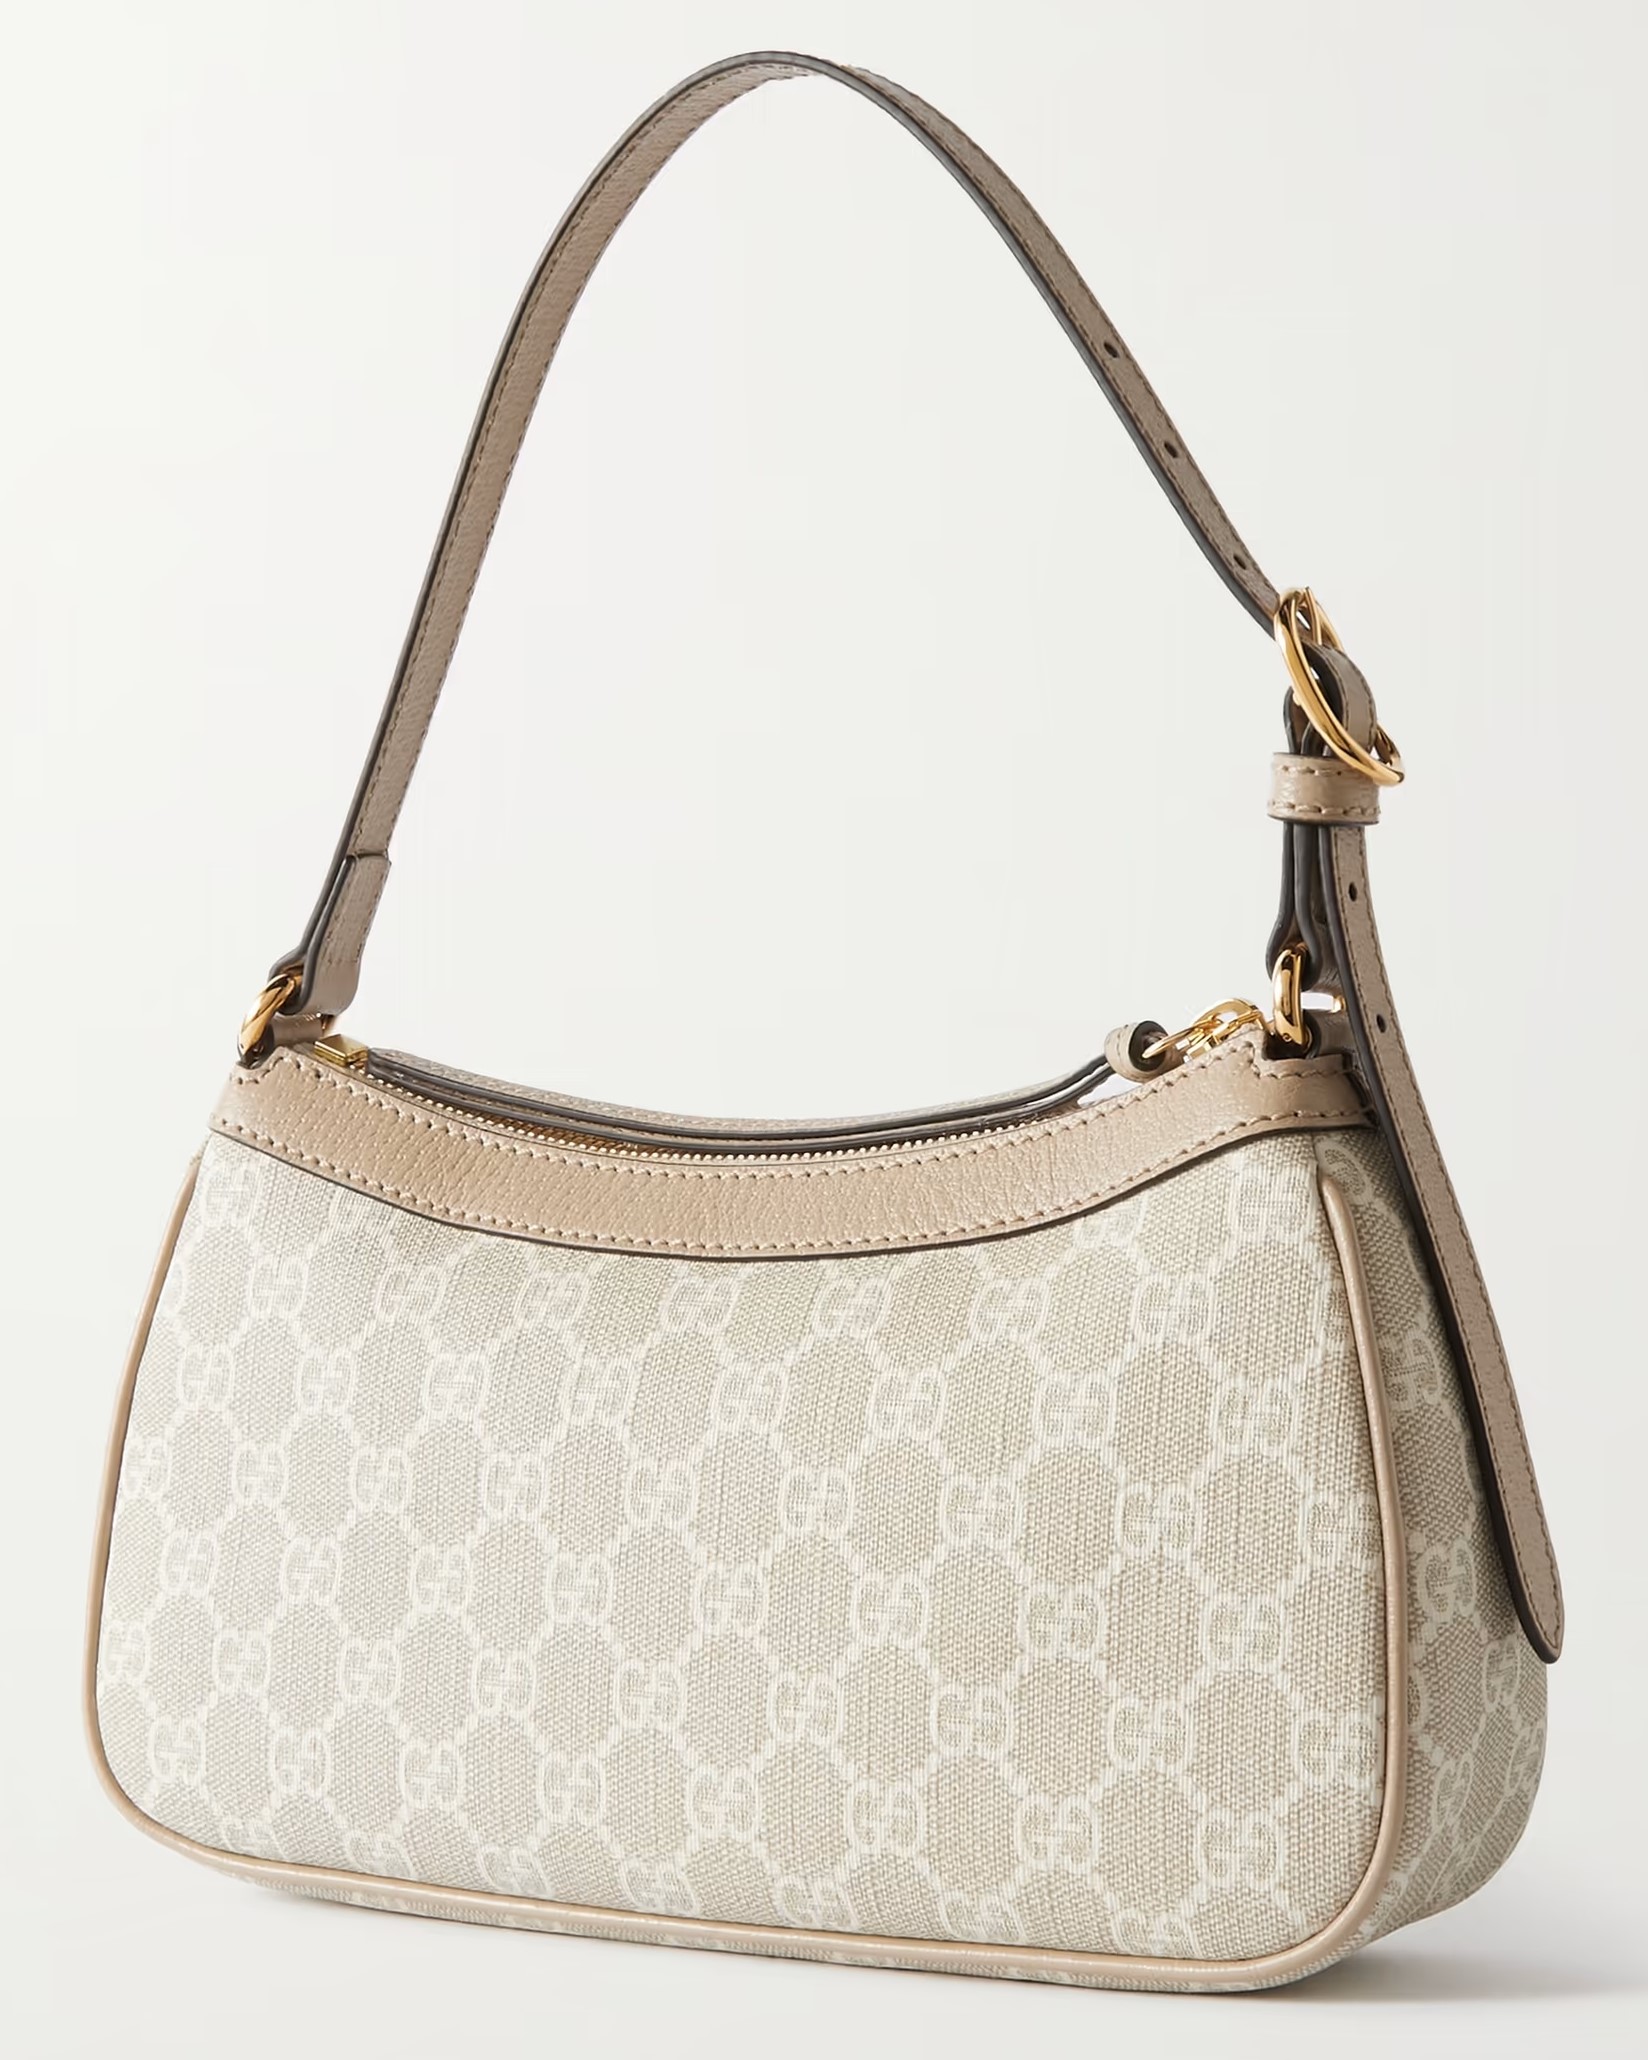 TÚI XÁCH NỮ GUCCI OPHIDIA EMBELLISHED TEXTURED LEATHER TRIMMED PRINTED COATED CANVAS SHOULDER BAG 6